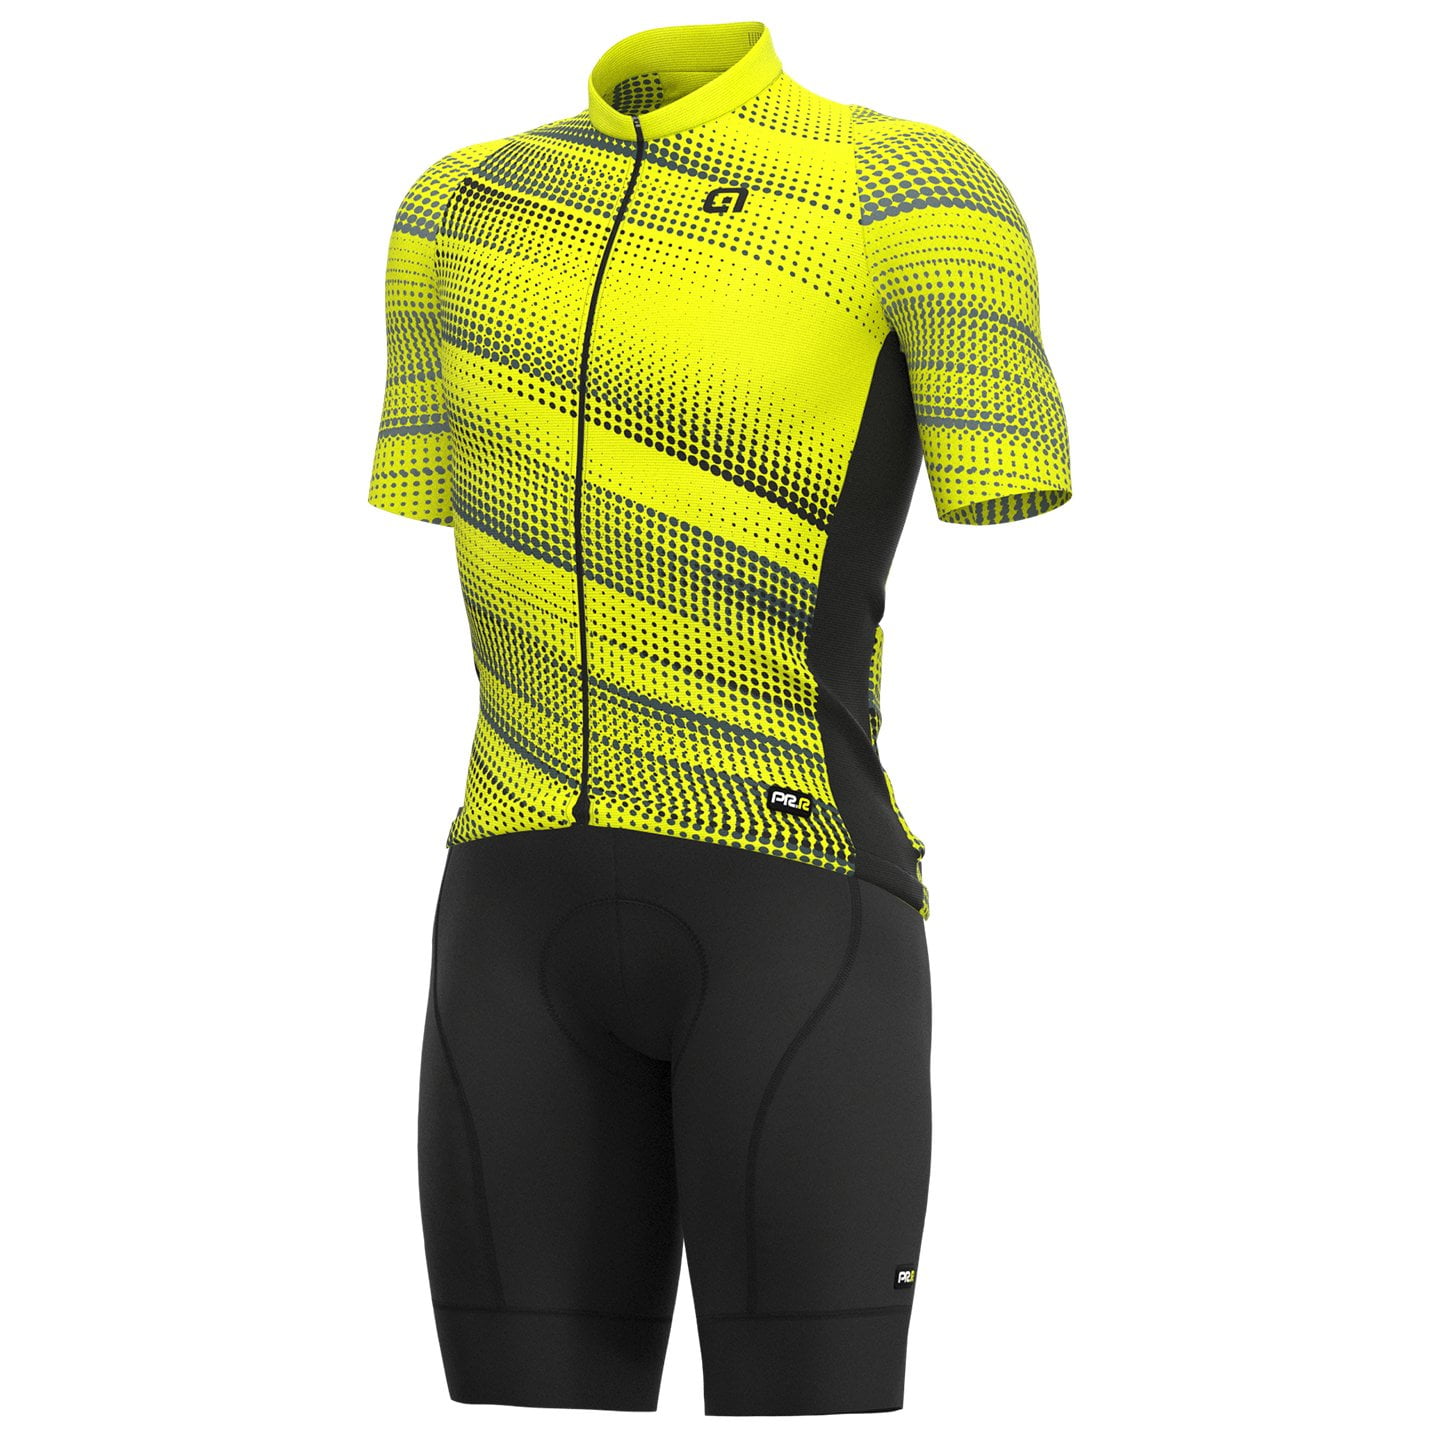 ALE Green Speed Set (cycling jersey + cycling shorts) Set (2 pieces), for men